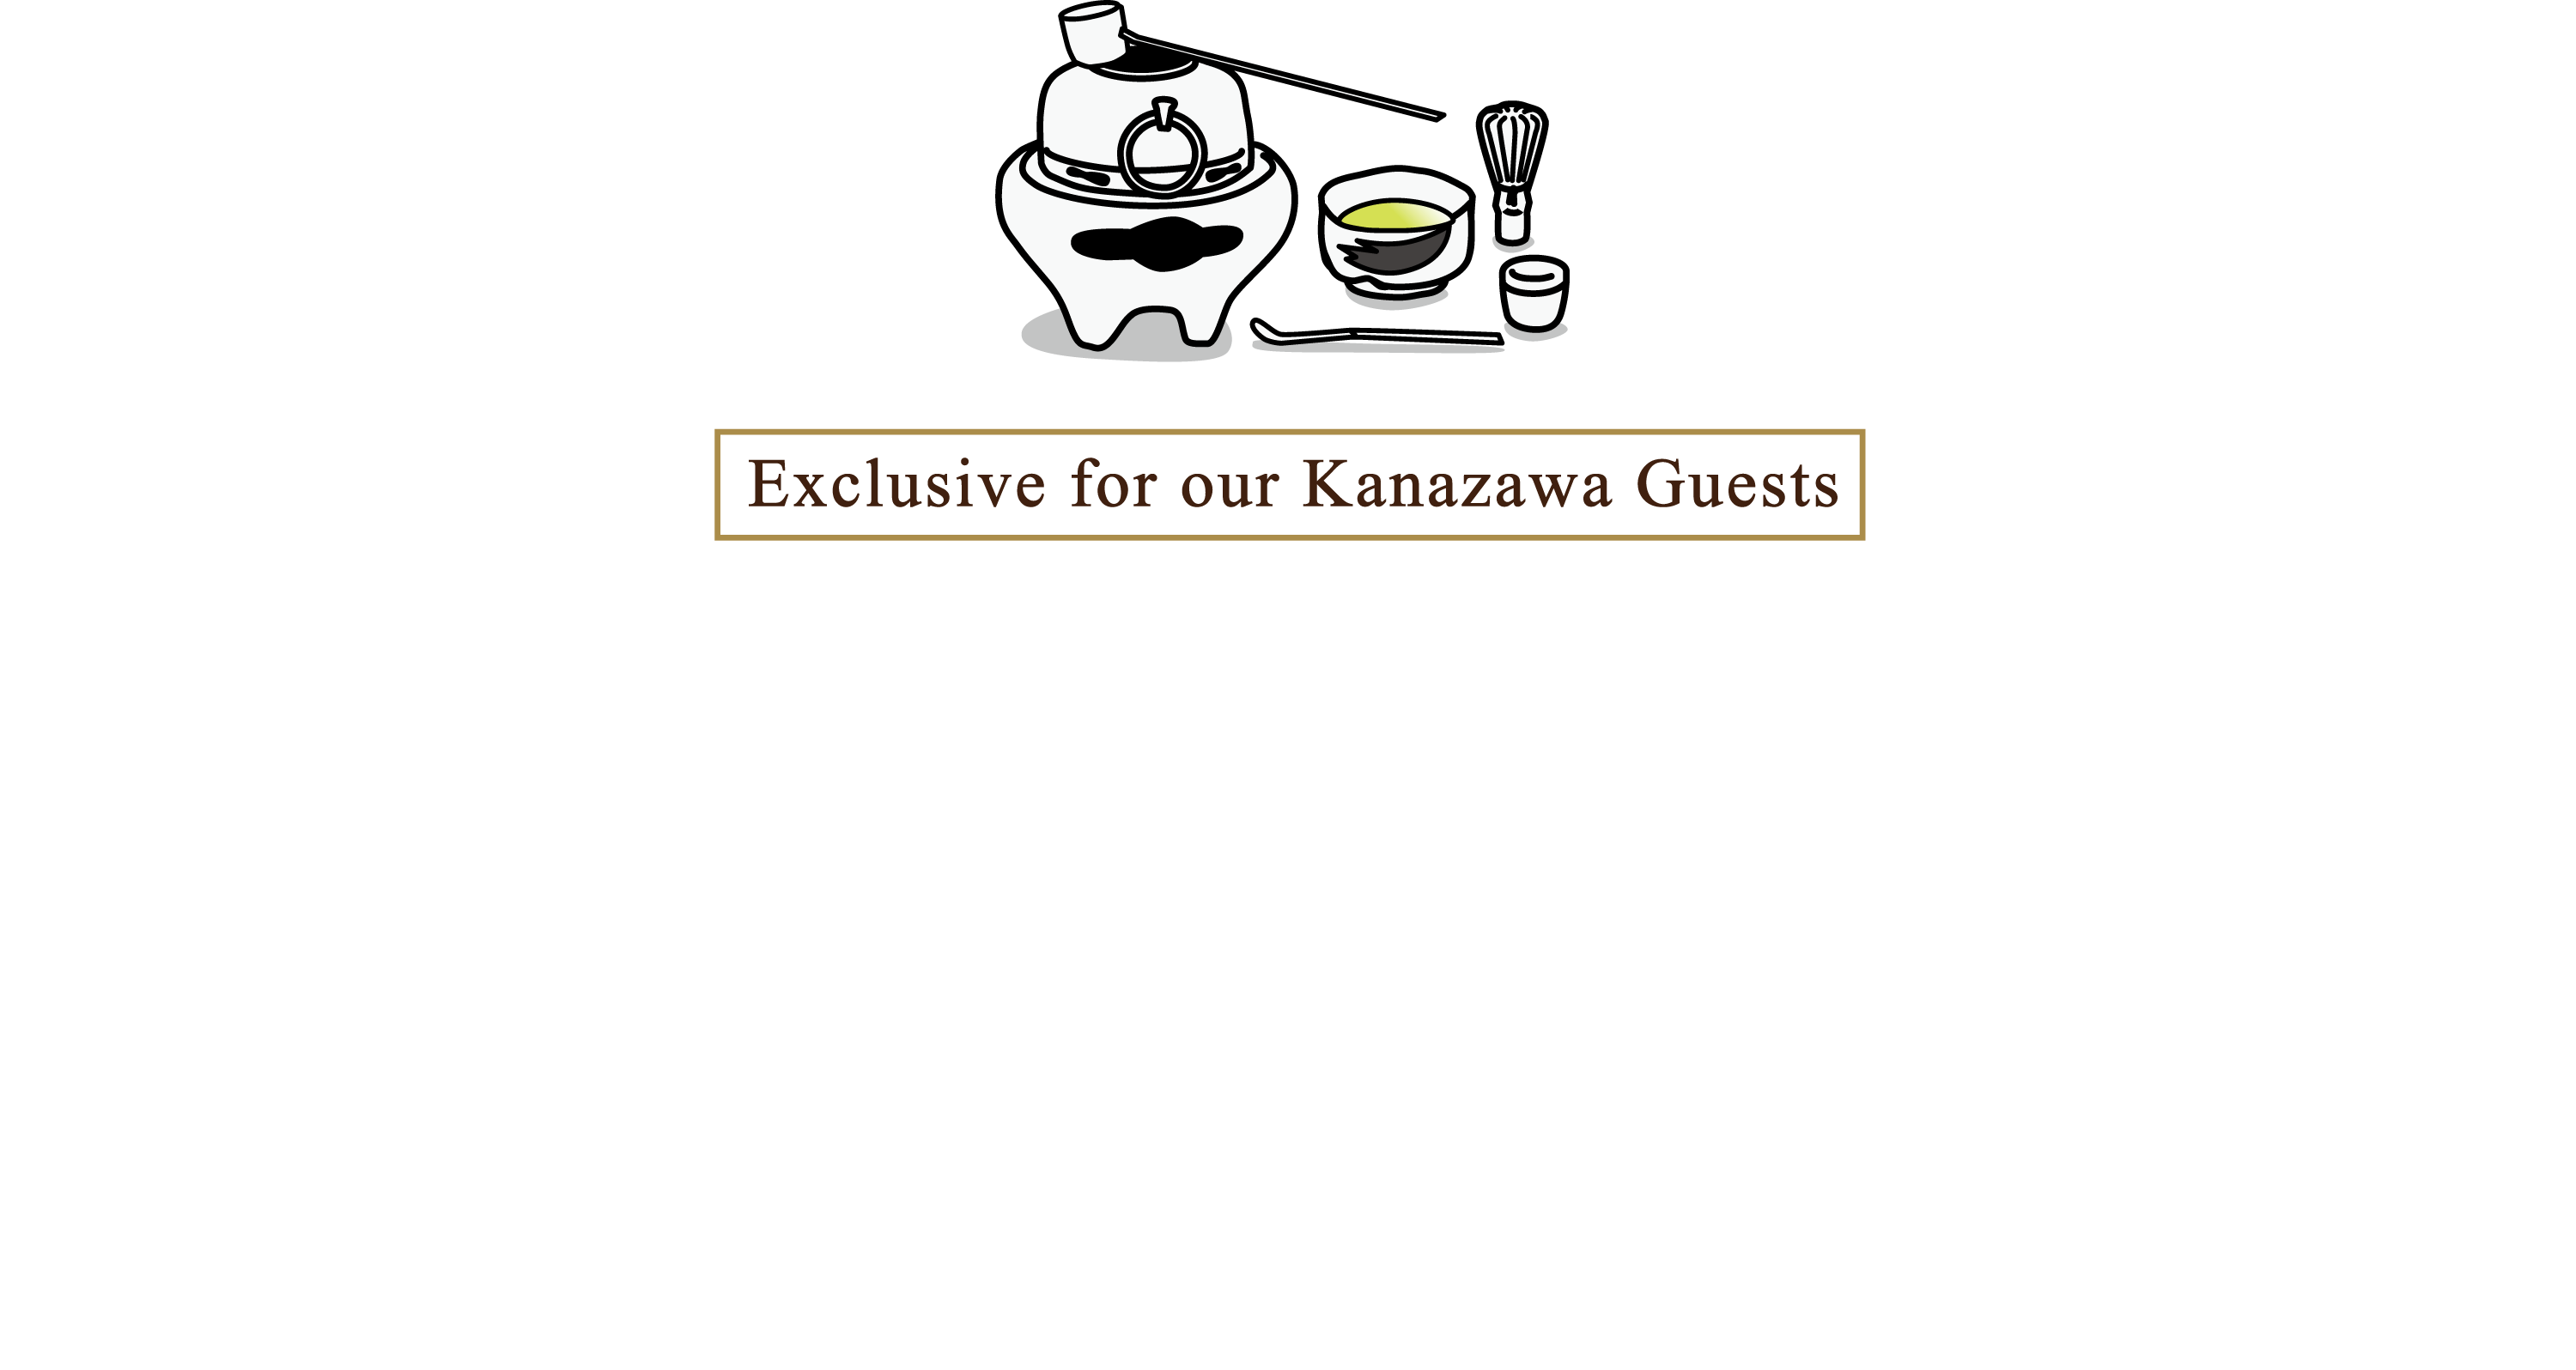 Exclusive for our Kanazawa Guests - Japanese Tea Ceremony